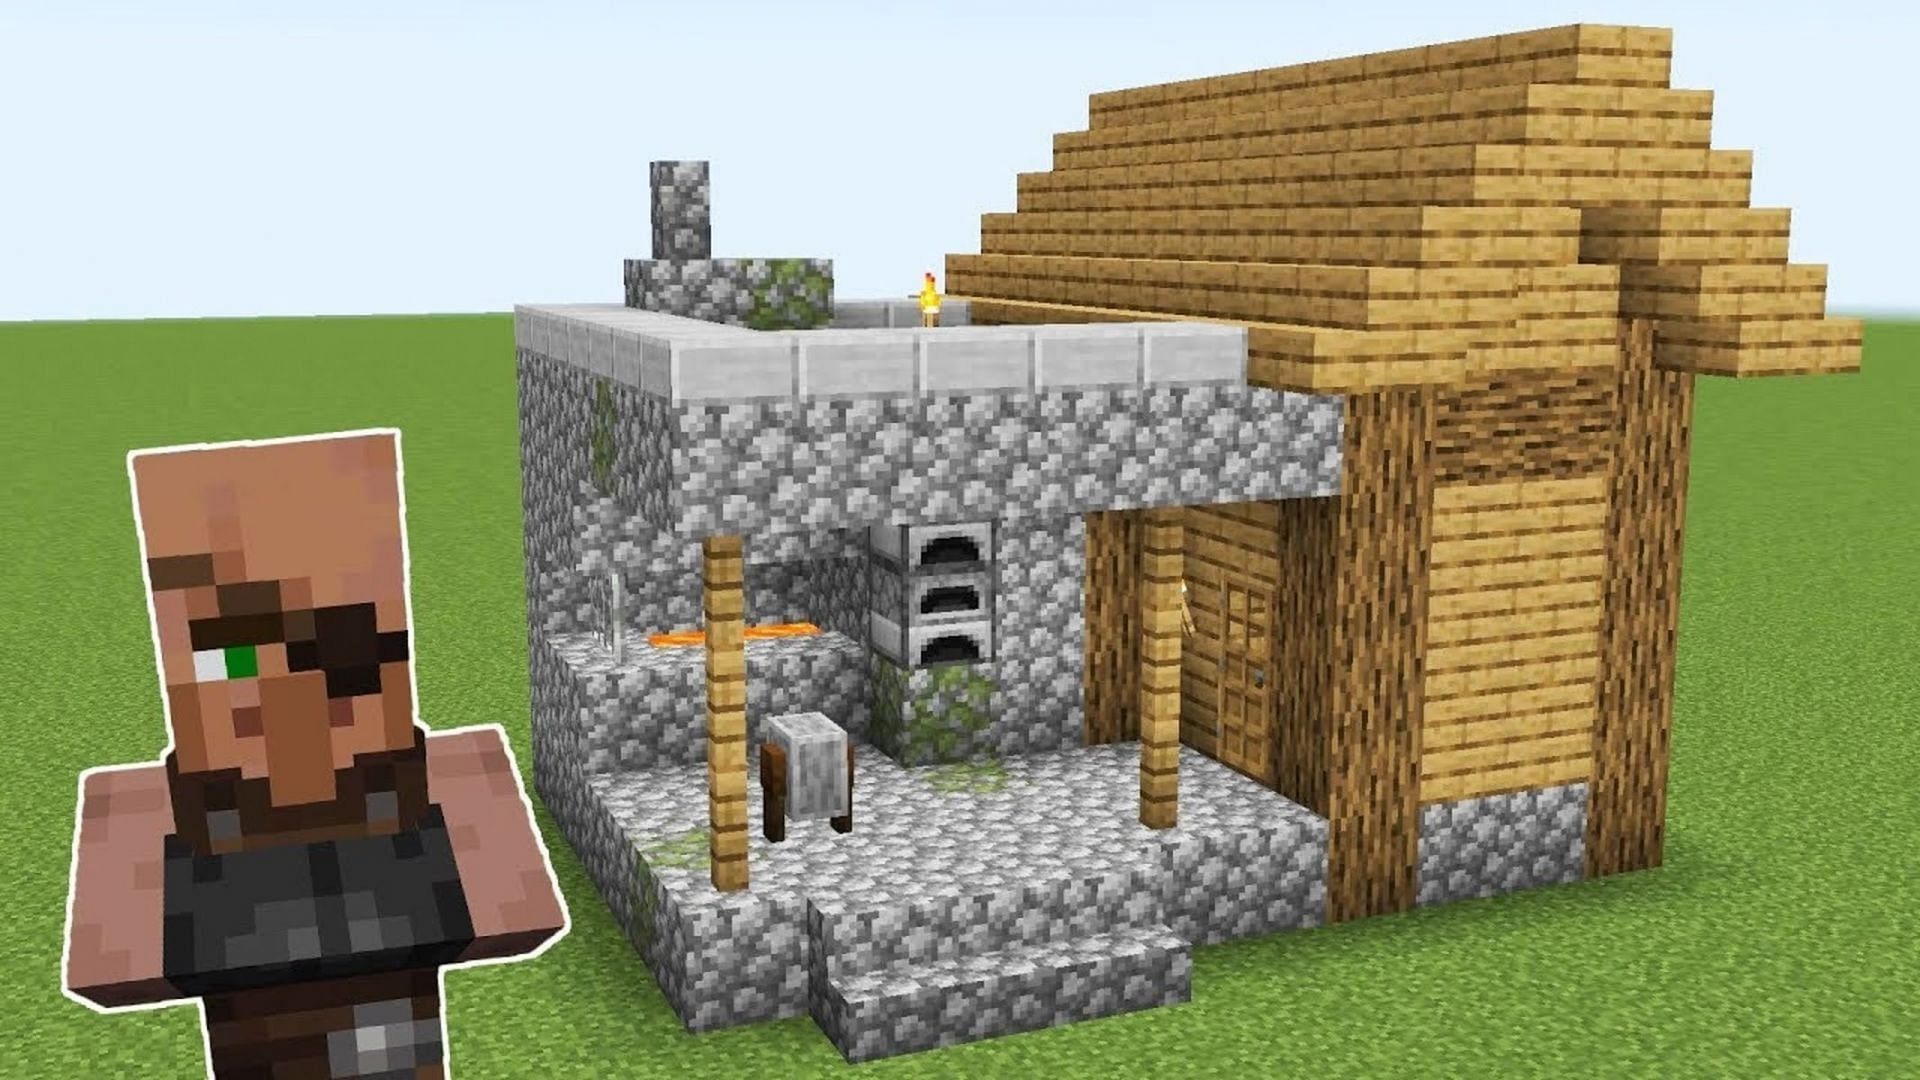 Why are blacksmiths important in Minecraft?